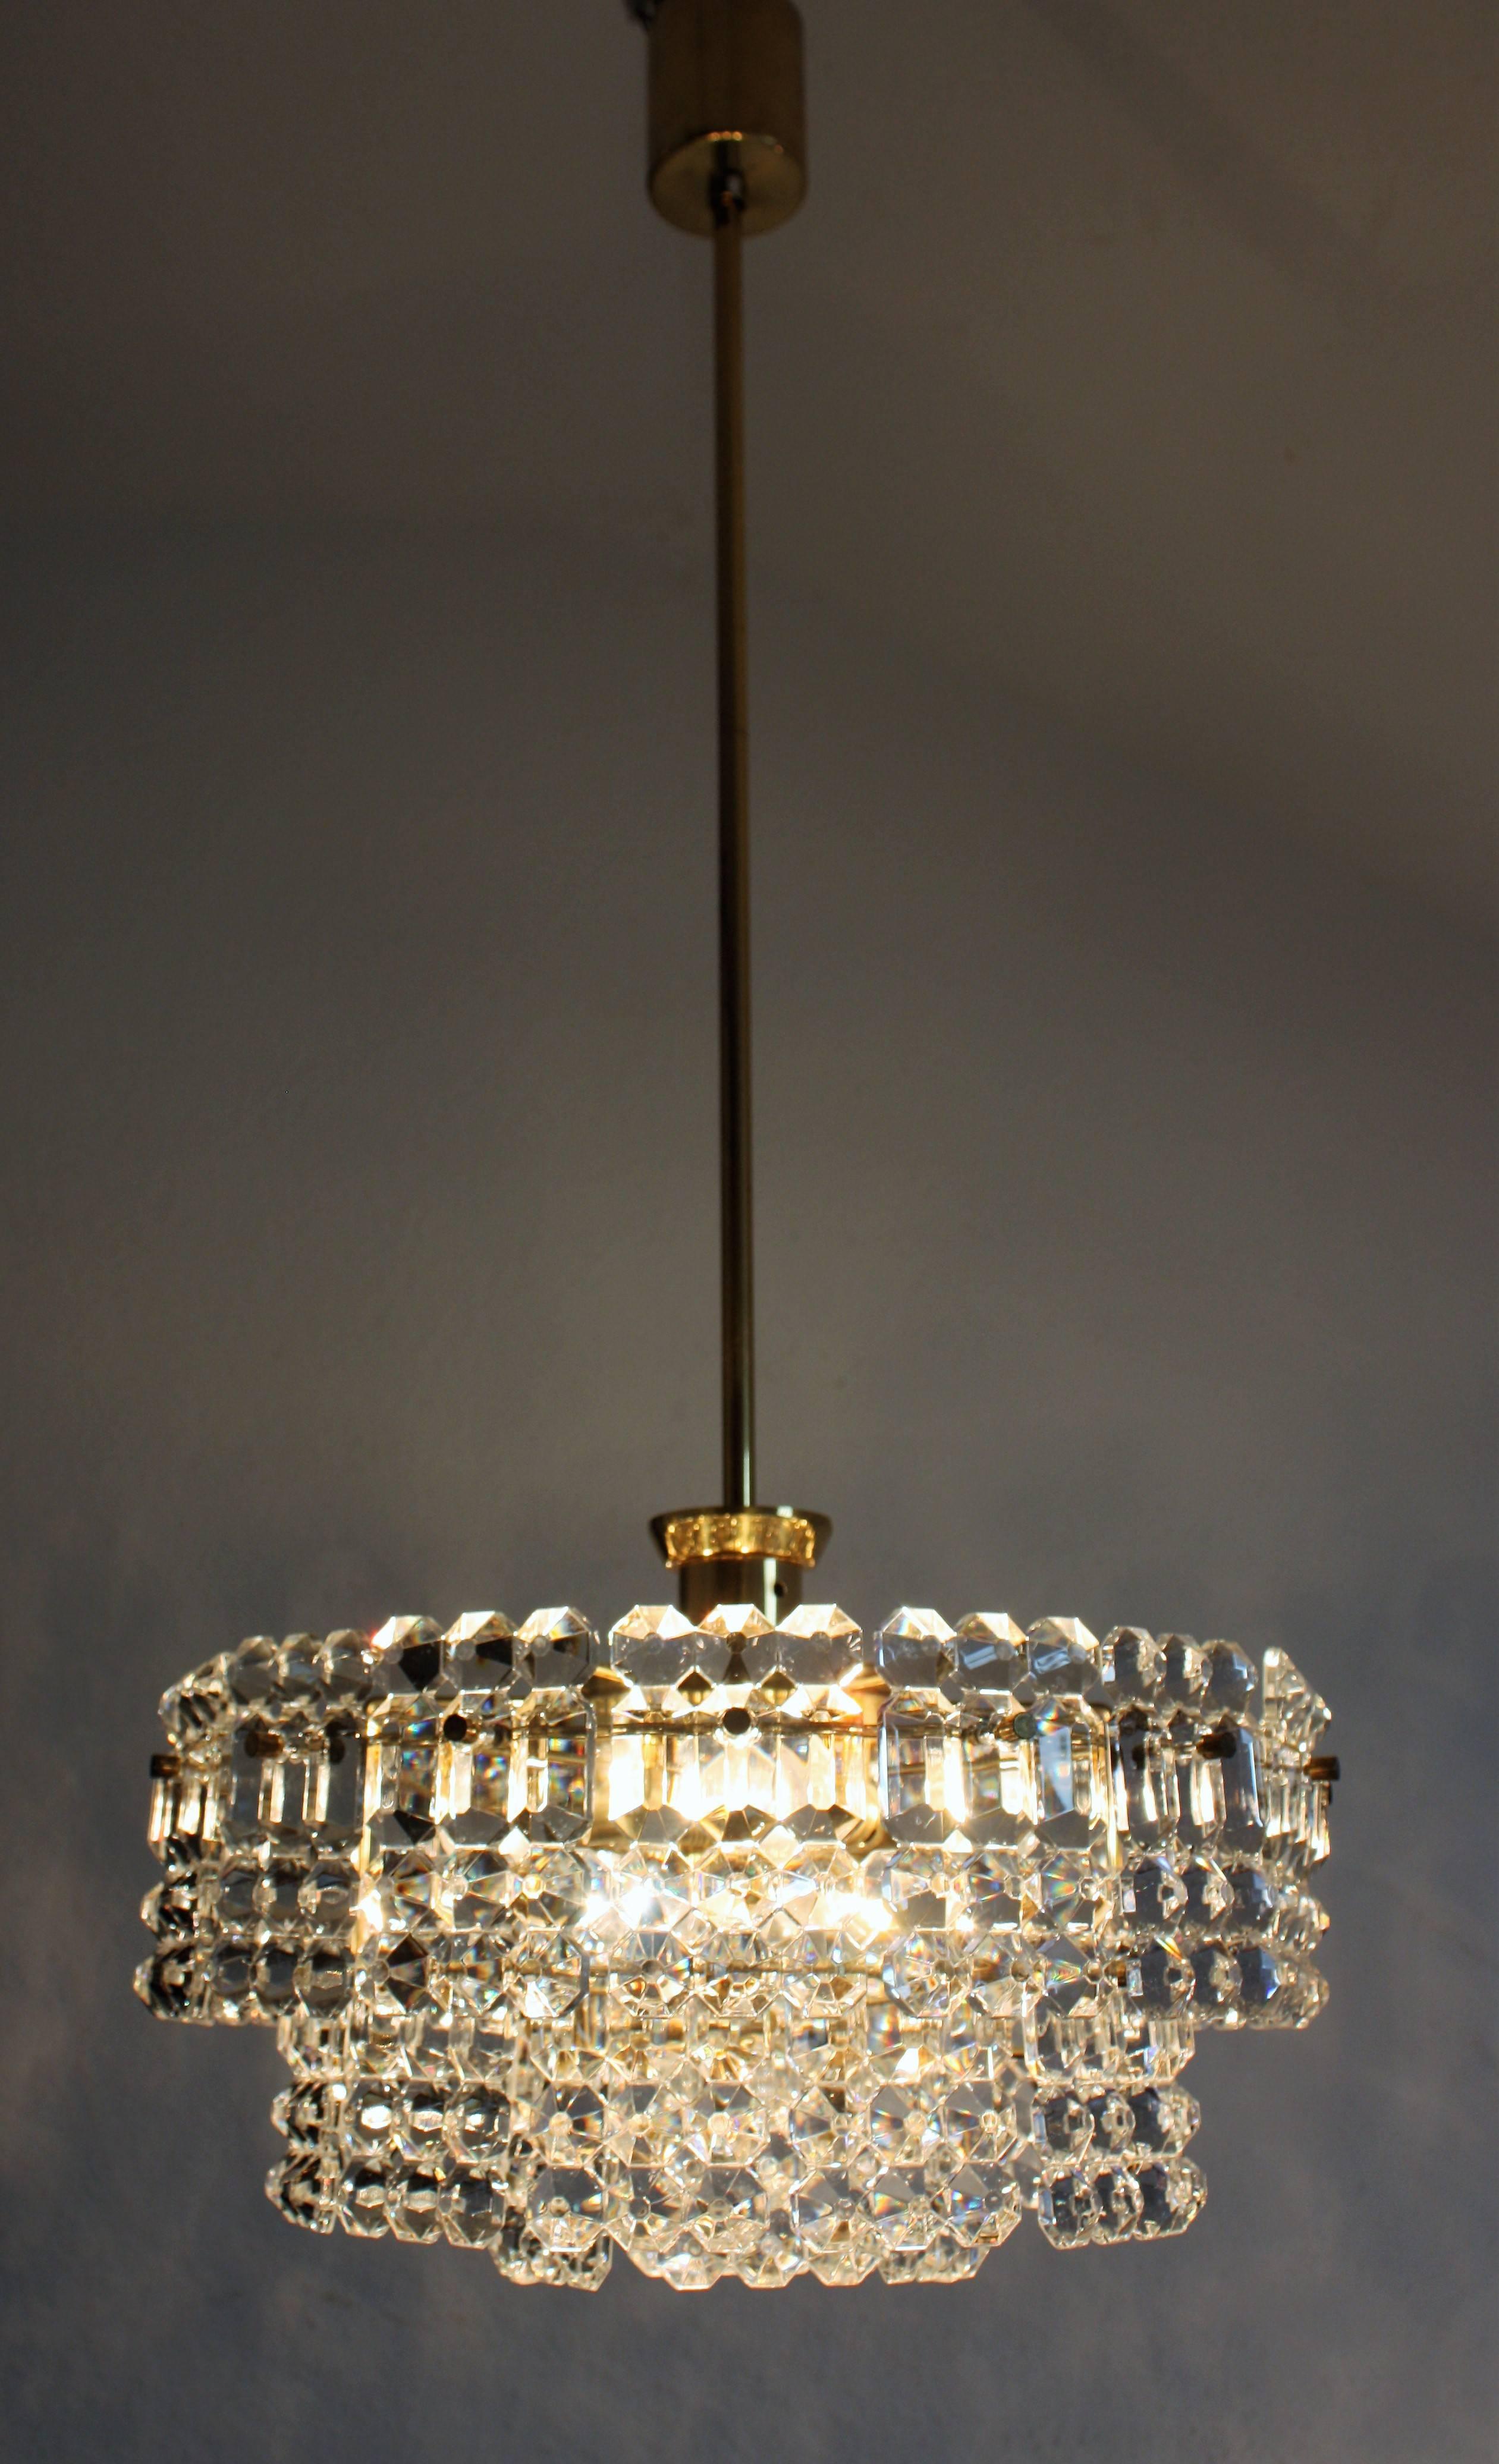 Beautiful and modern high quality seven-light crystal chandelier by Kinkeldey, Germany, circa 1960s.
Three-tier chandelier with geometric crystal on the brass frame. Height can be shorten in the middle of the chain.
Socket: Six x E14 and one x E27 